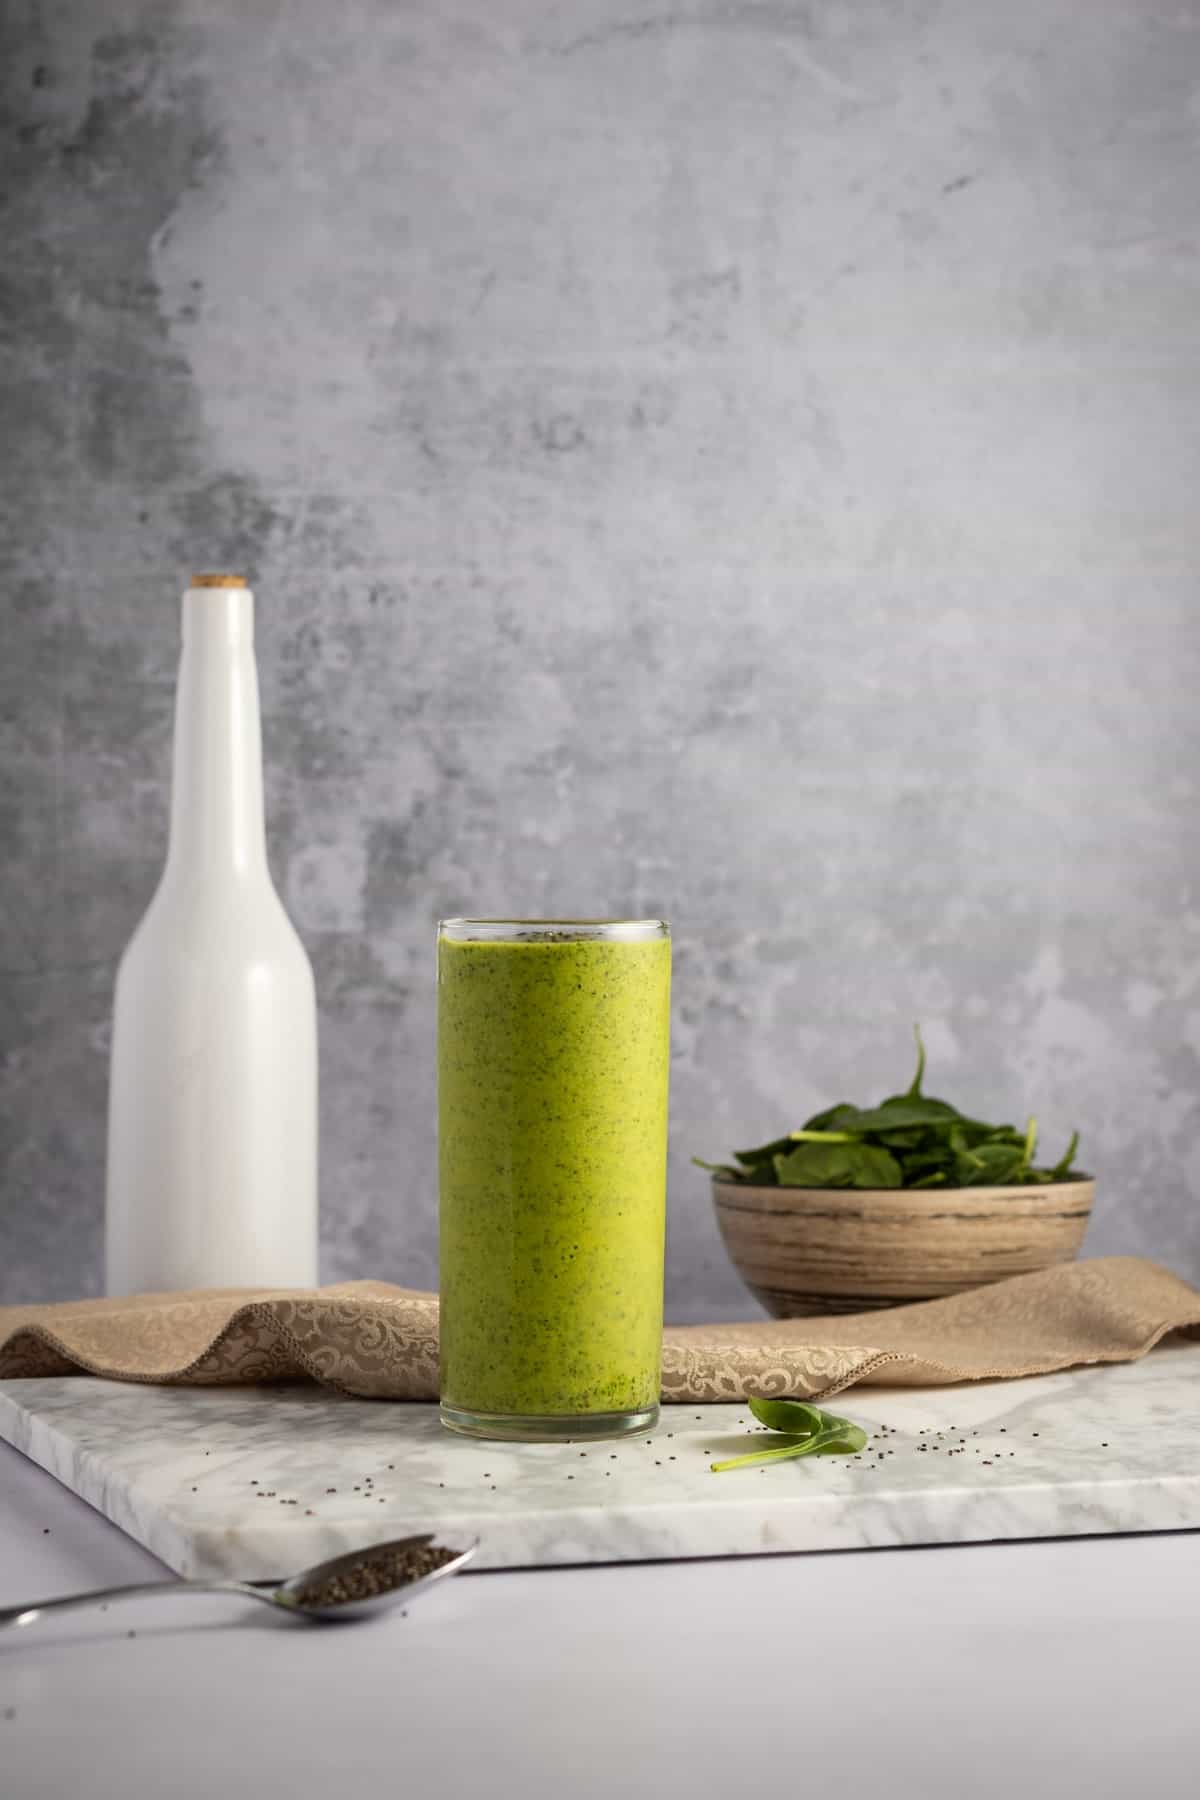 A side shot of a green smoothie with spinach and a bottle in the backdrop.